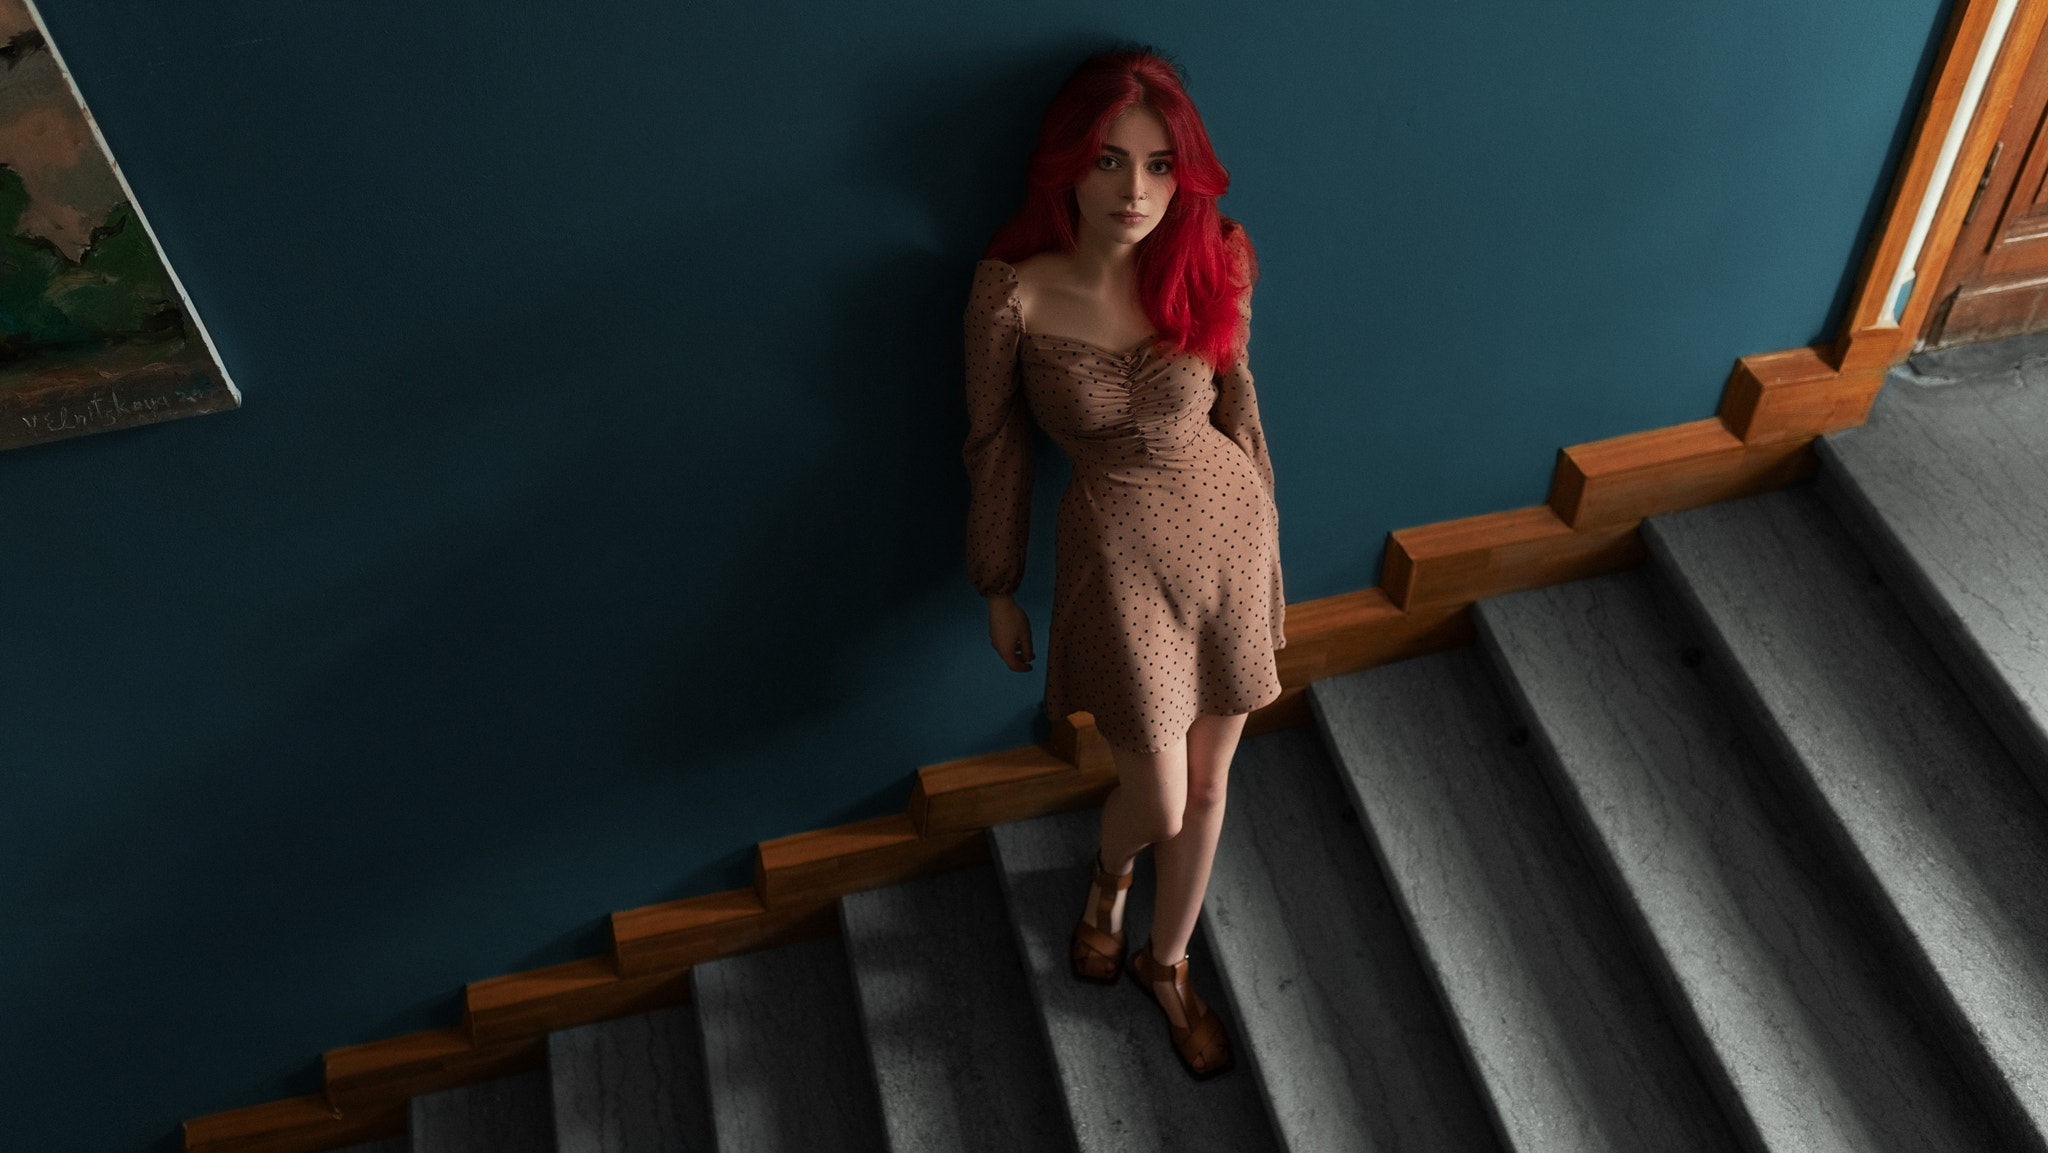 People 2048x1153 George Poison women redhead dress high angle stairs Polina model